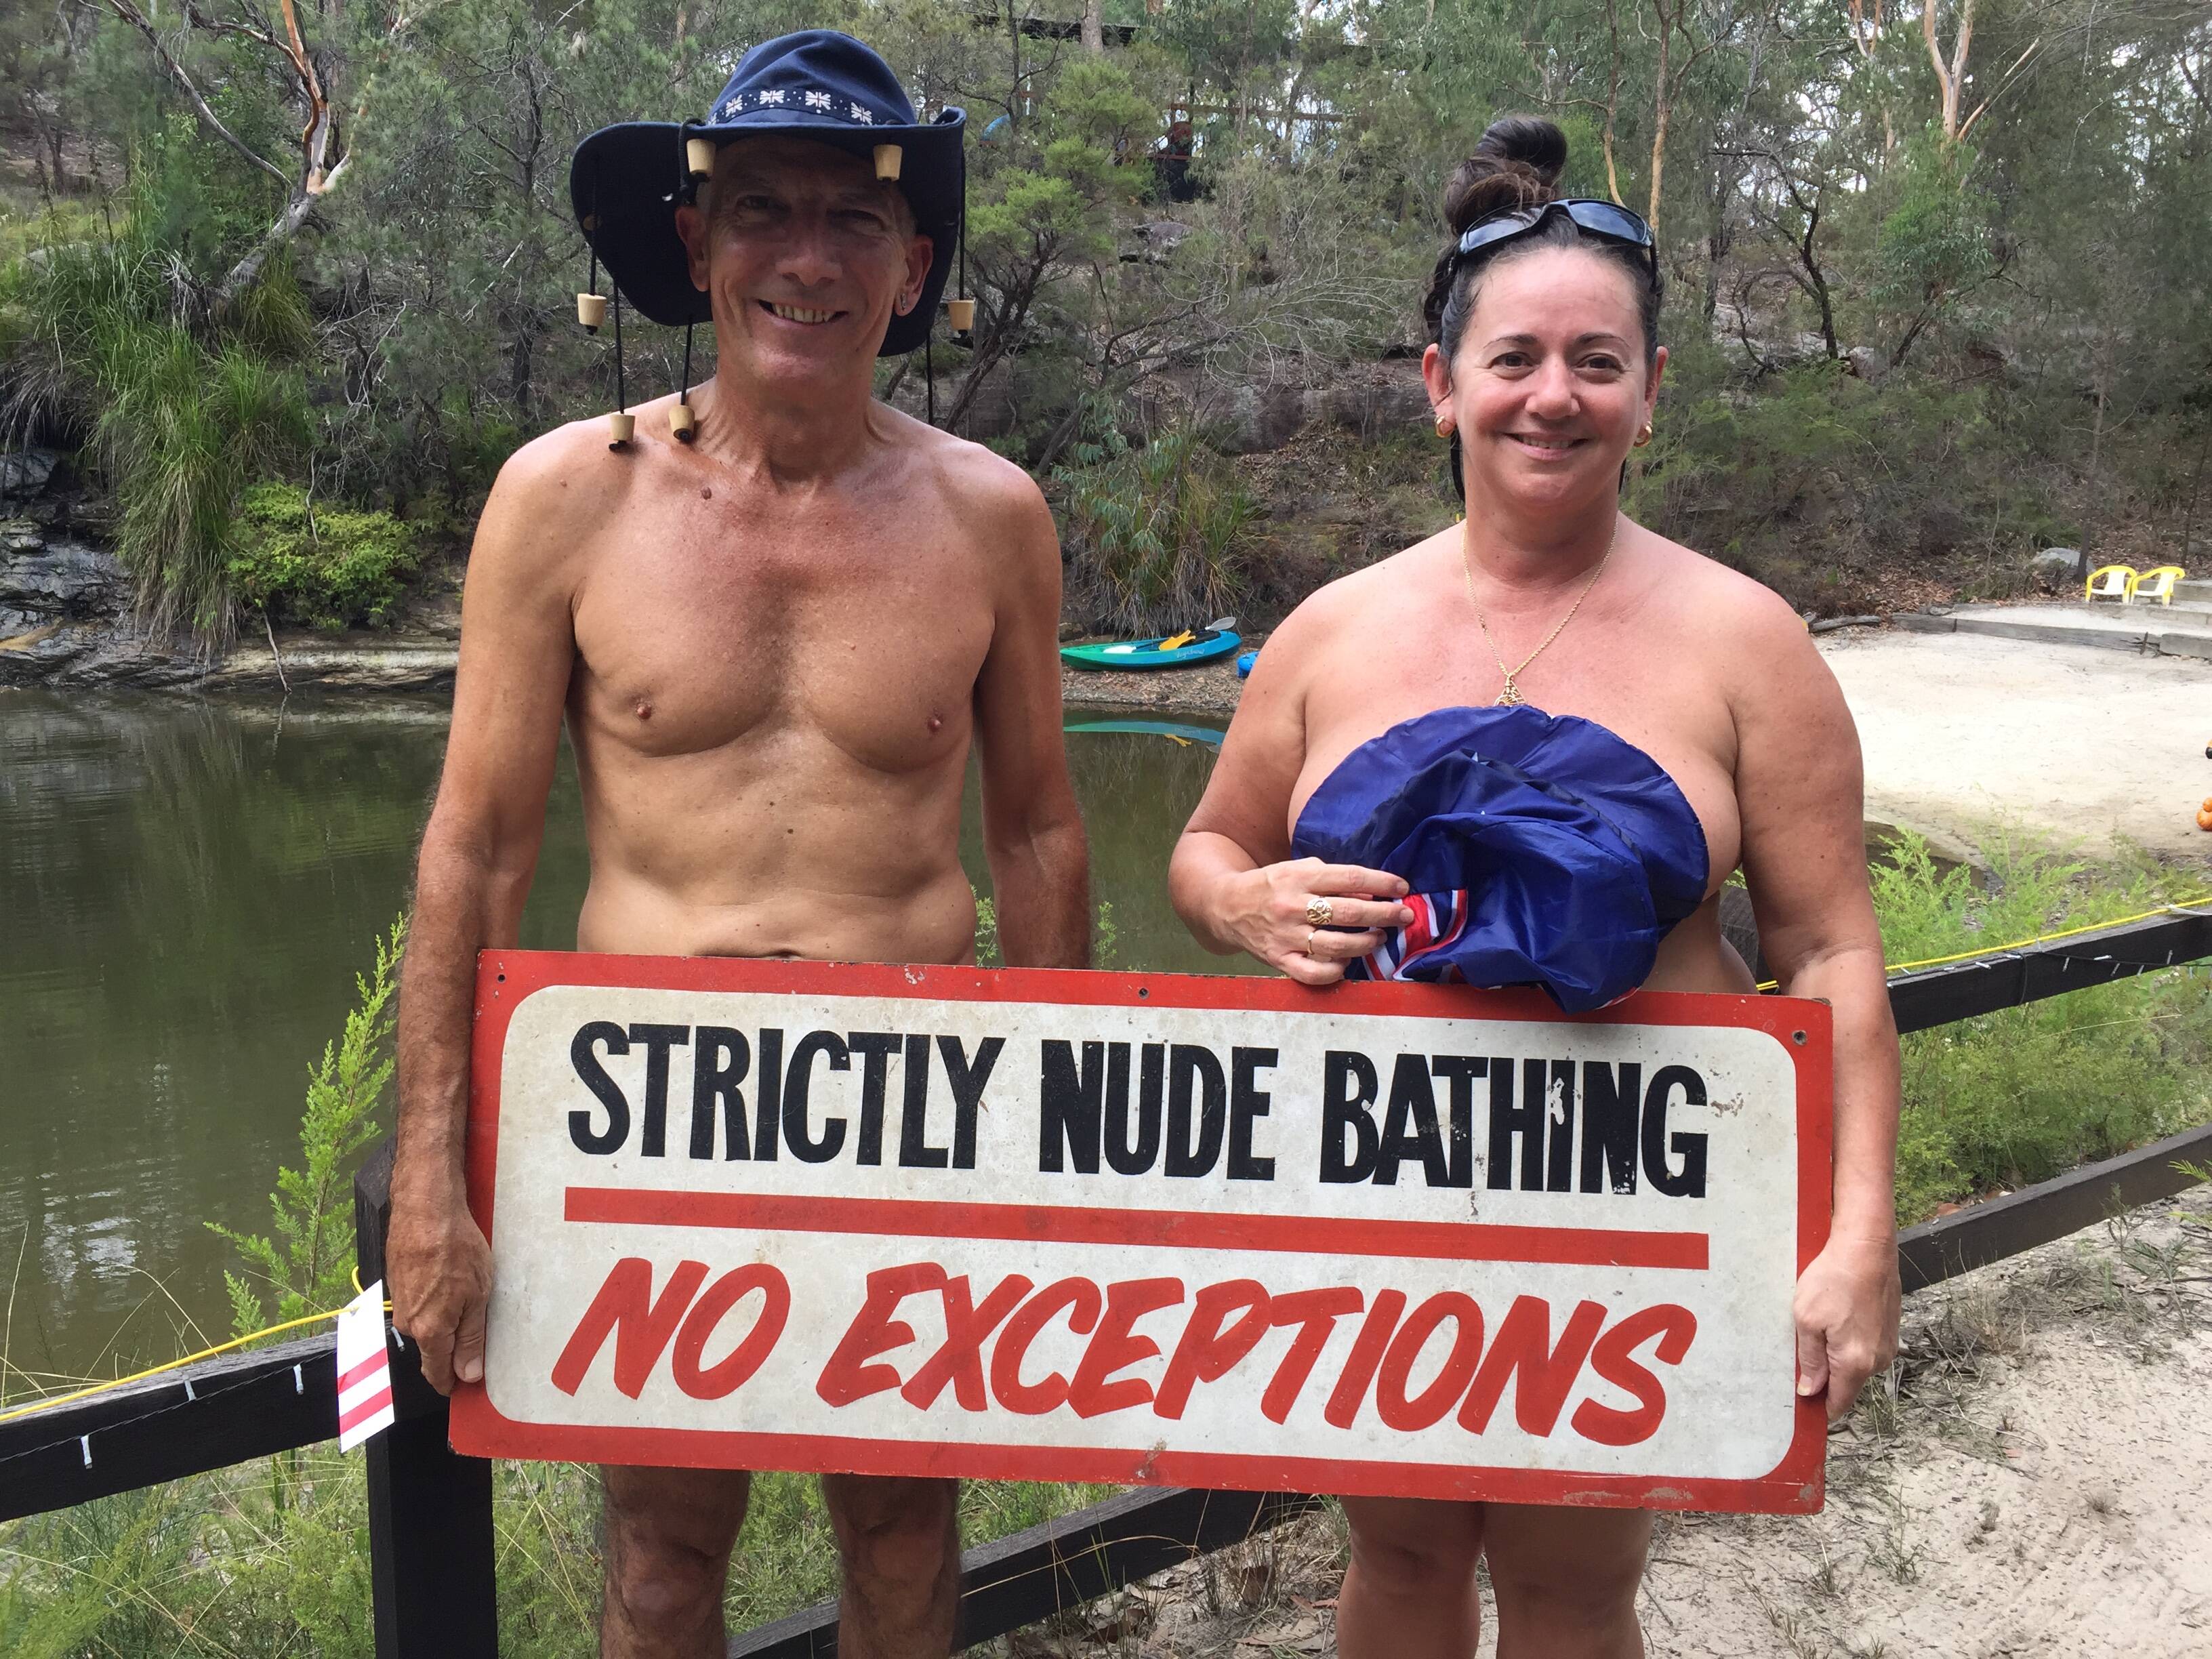 Family Nudist Camp Stories